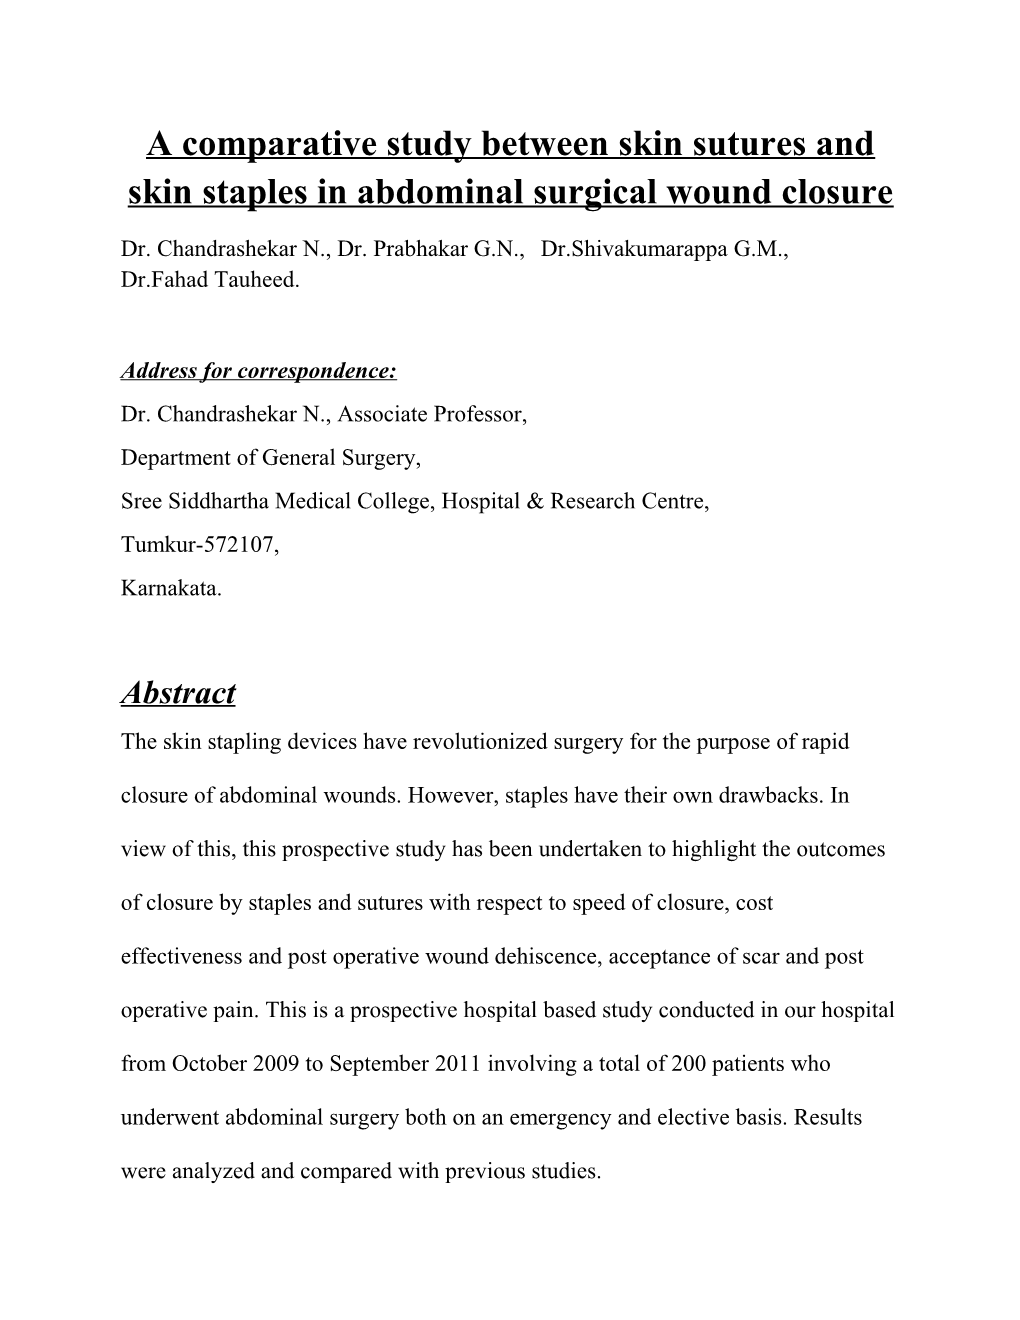 A Comparative Study Between Skin Sutures and Skin Staples in Abdominal Surgical Wound Closure